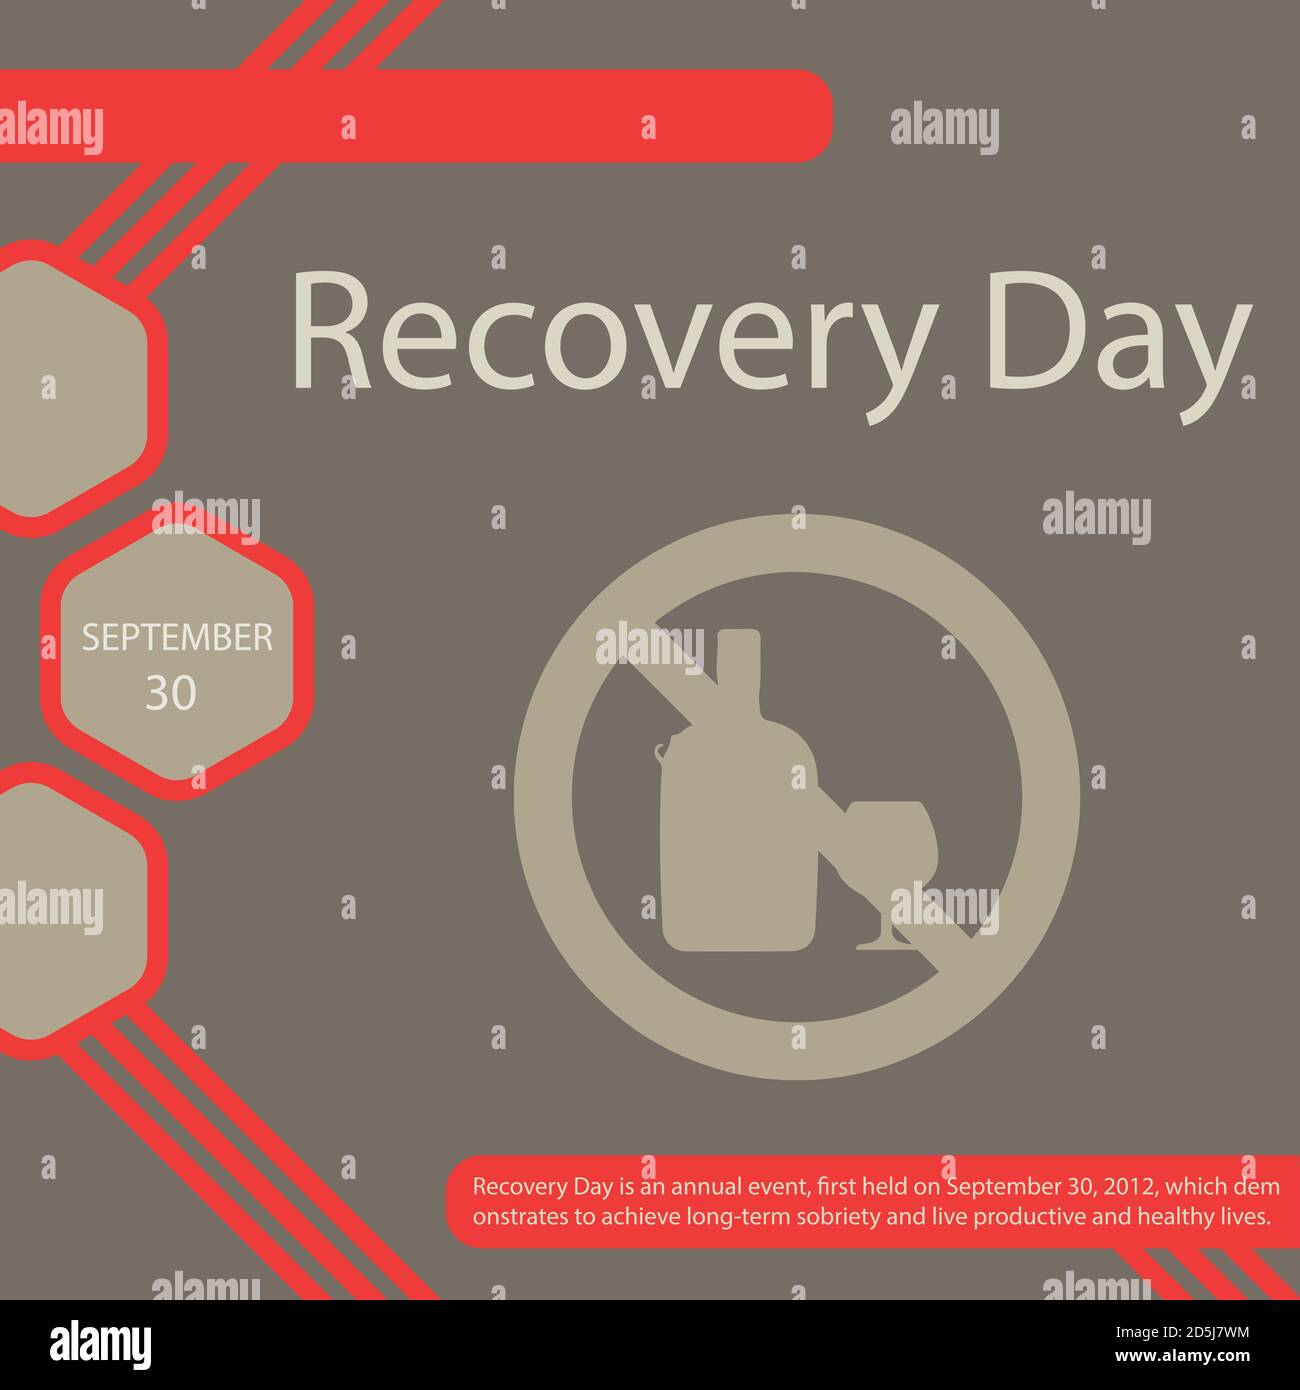 Recovery Day is an annual event, first held on September 30, 2012, which demonstrates to achieve long-term sobriety and live productive and healthy li Stock Vector